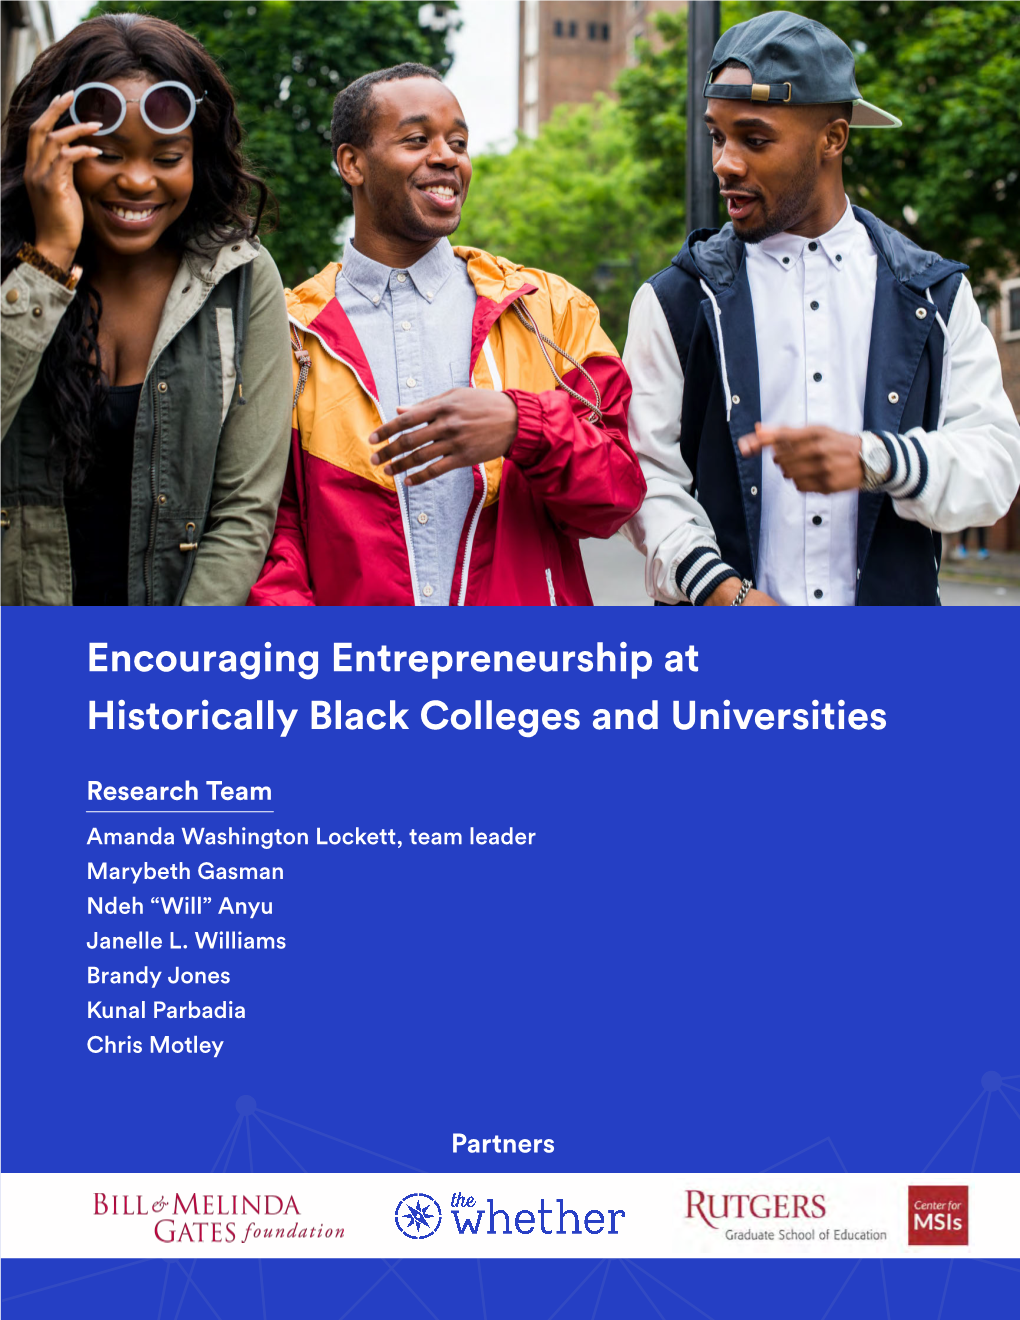 Encouraging Entrepreneurship at Historically Black Colleges and Universities